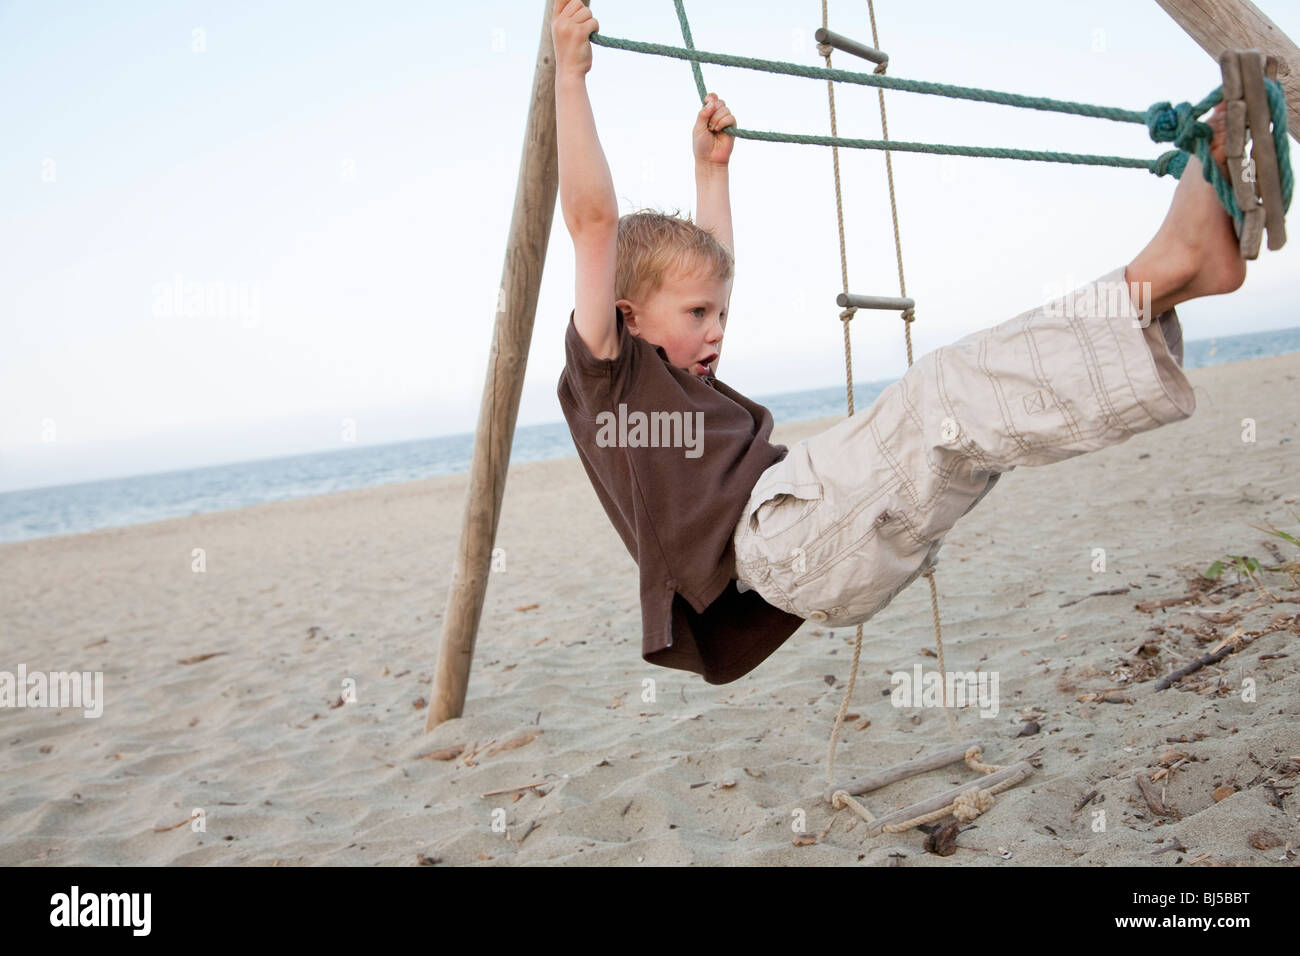 Boy on a swing at the beach Stock Photo